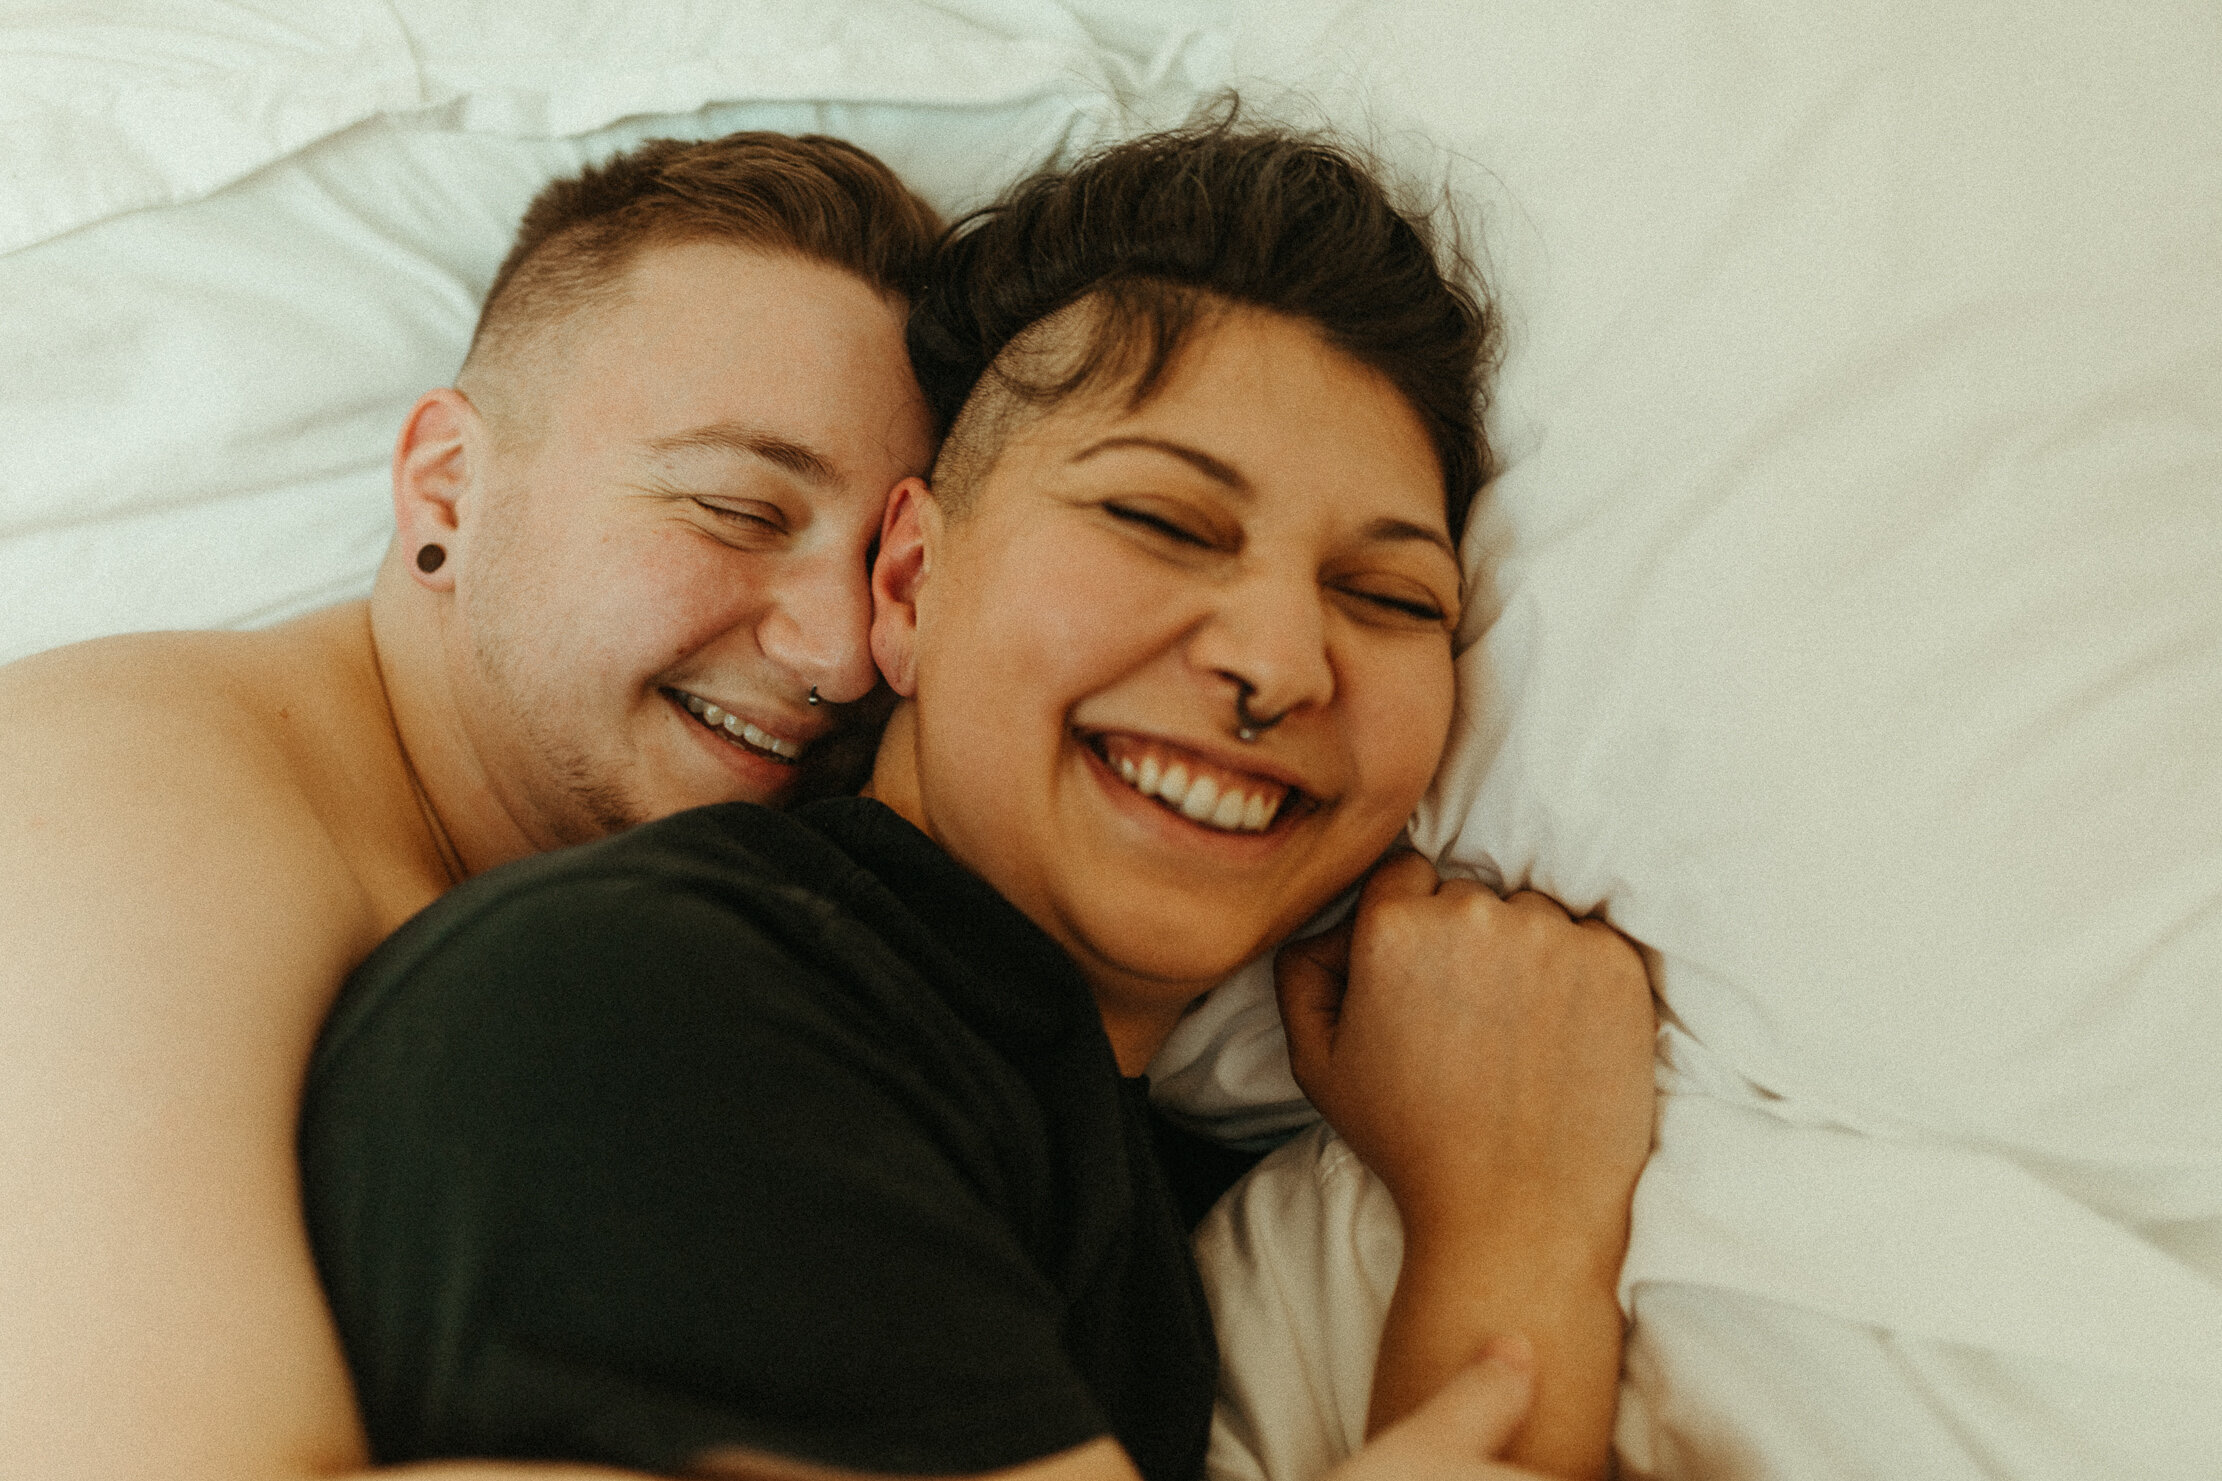 seattle-portland-tacoma-queer-trans-non-binary-intimate-in-home-pnw-engaygement-engagement-couples-boudoir-photographer-halle-roland-photography-395.jpg